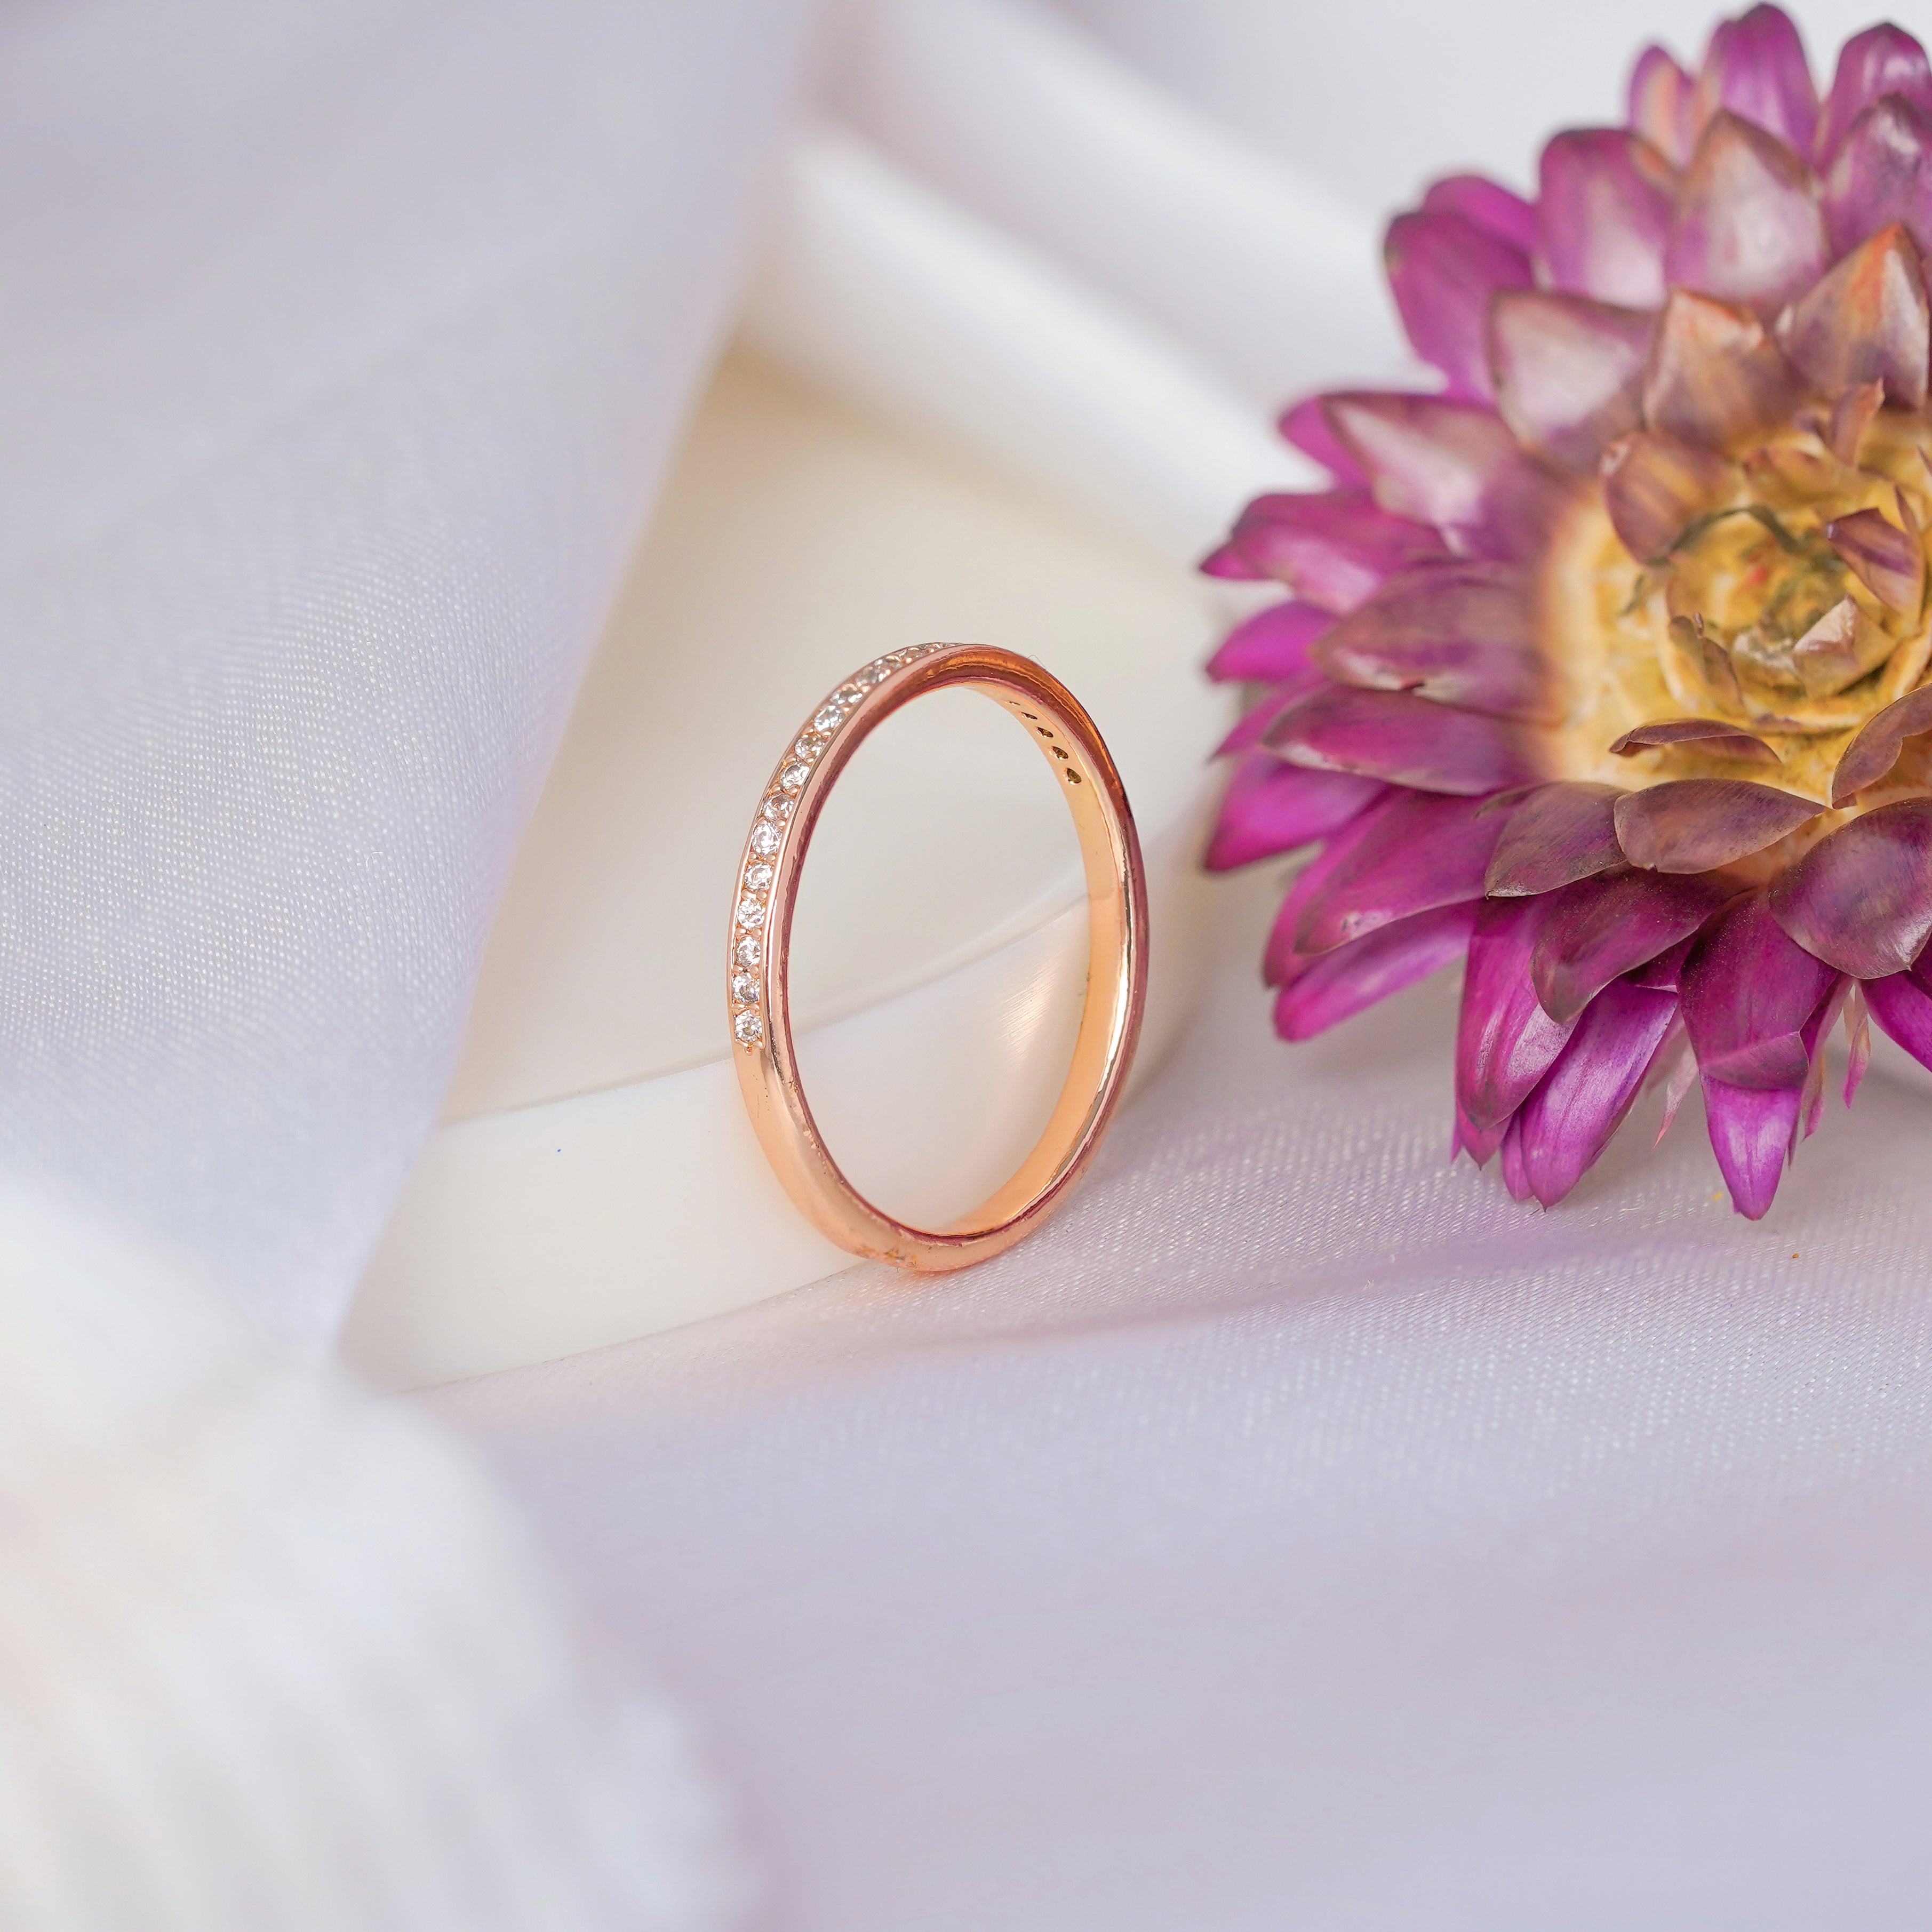 Jewelsium Rose Gold Designer Ring: Where Style Meets Perfection